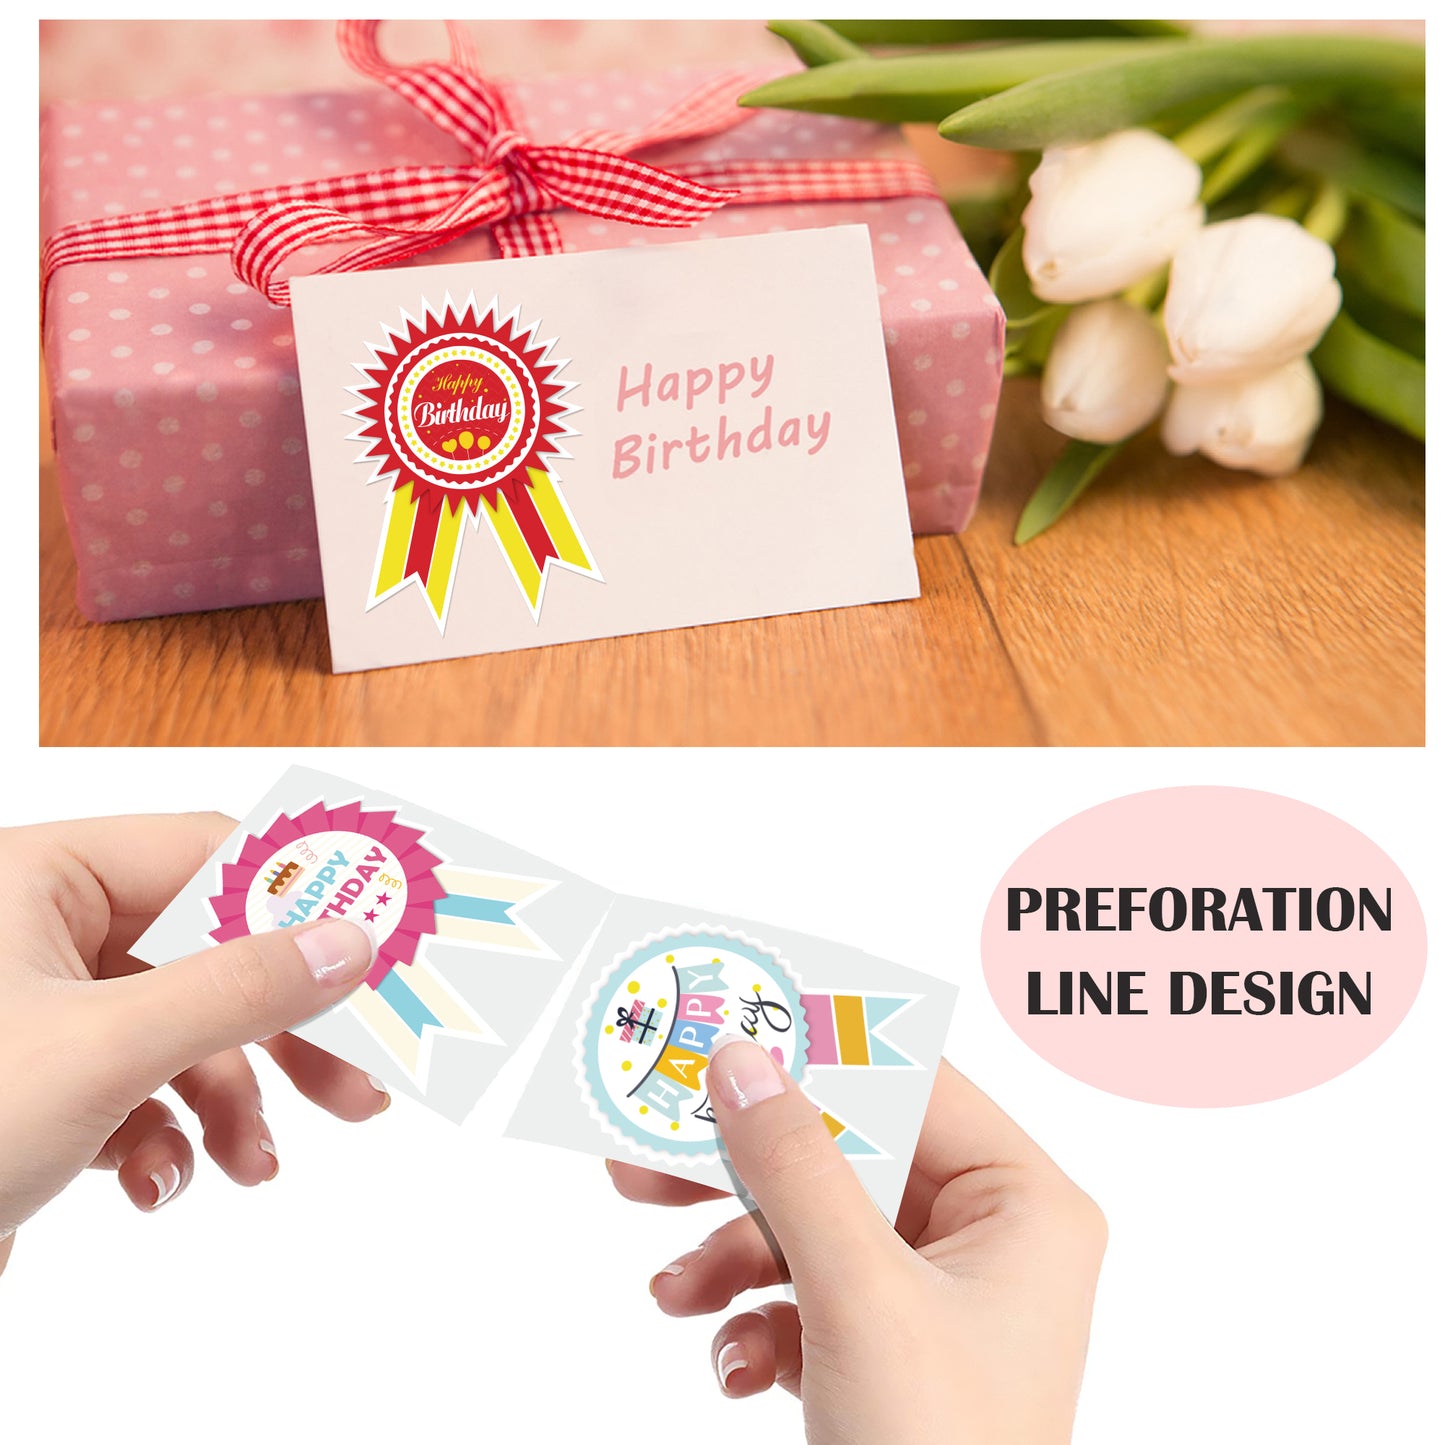 HomeDoReMi Happy Birthday Stickers for Kids 200Pcs, Painted Palette Happy Birthday Badge, Celebrate Pattern Self Adhesive Ribbon Rewards for Kids, Size:3.7 x 2.6 inch